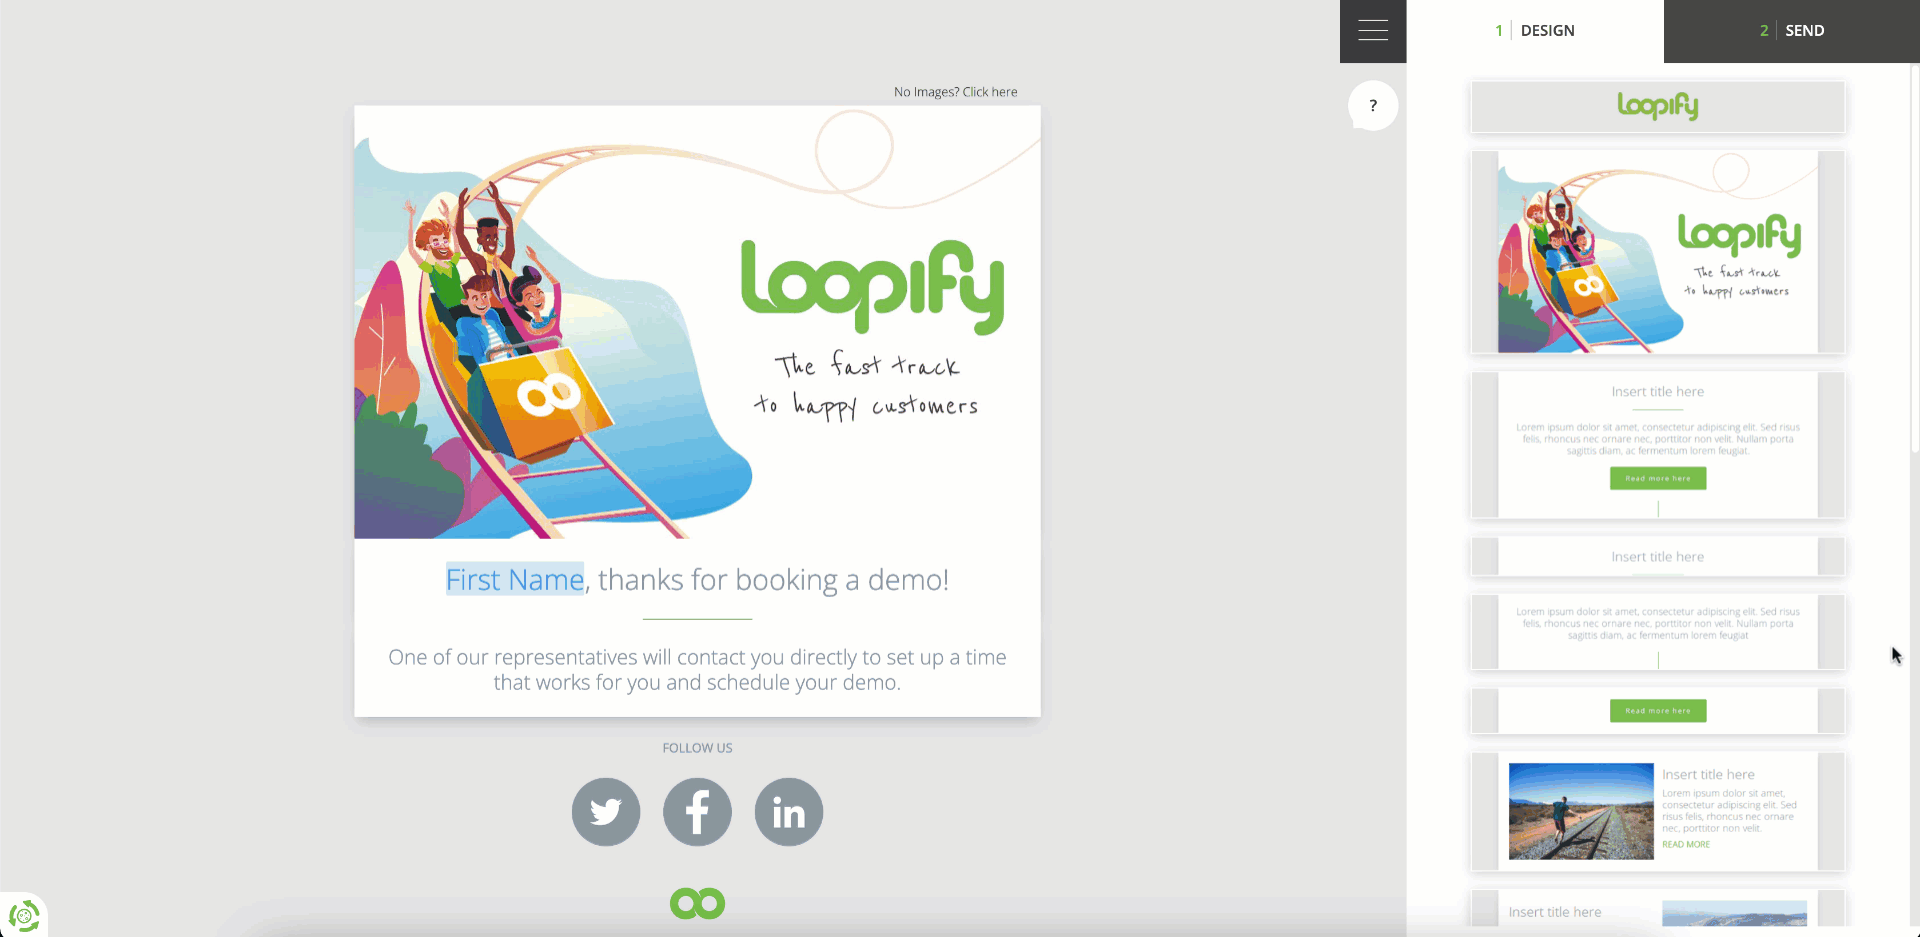 The drag-and-drop tool in the Campaign editor in Loopify.